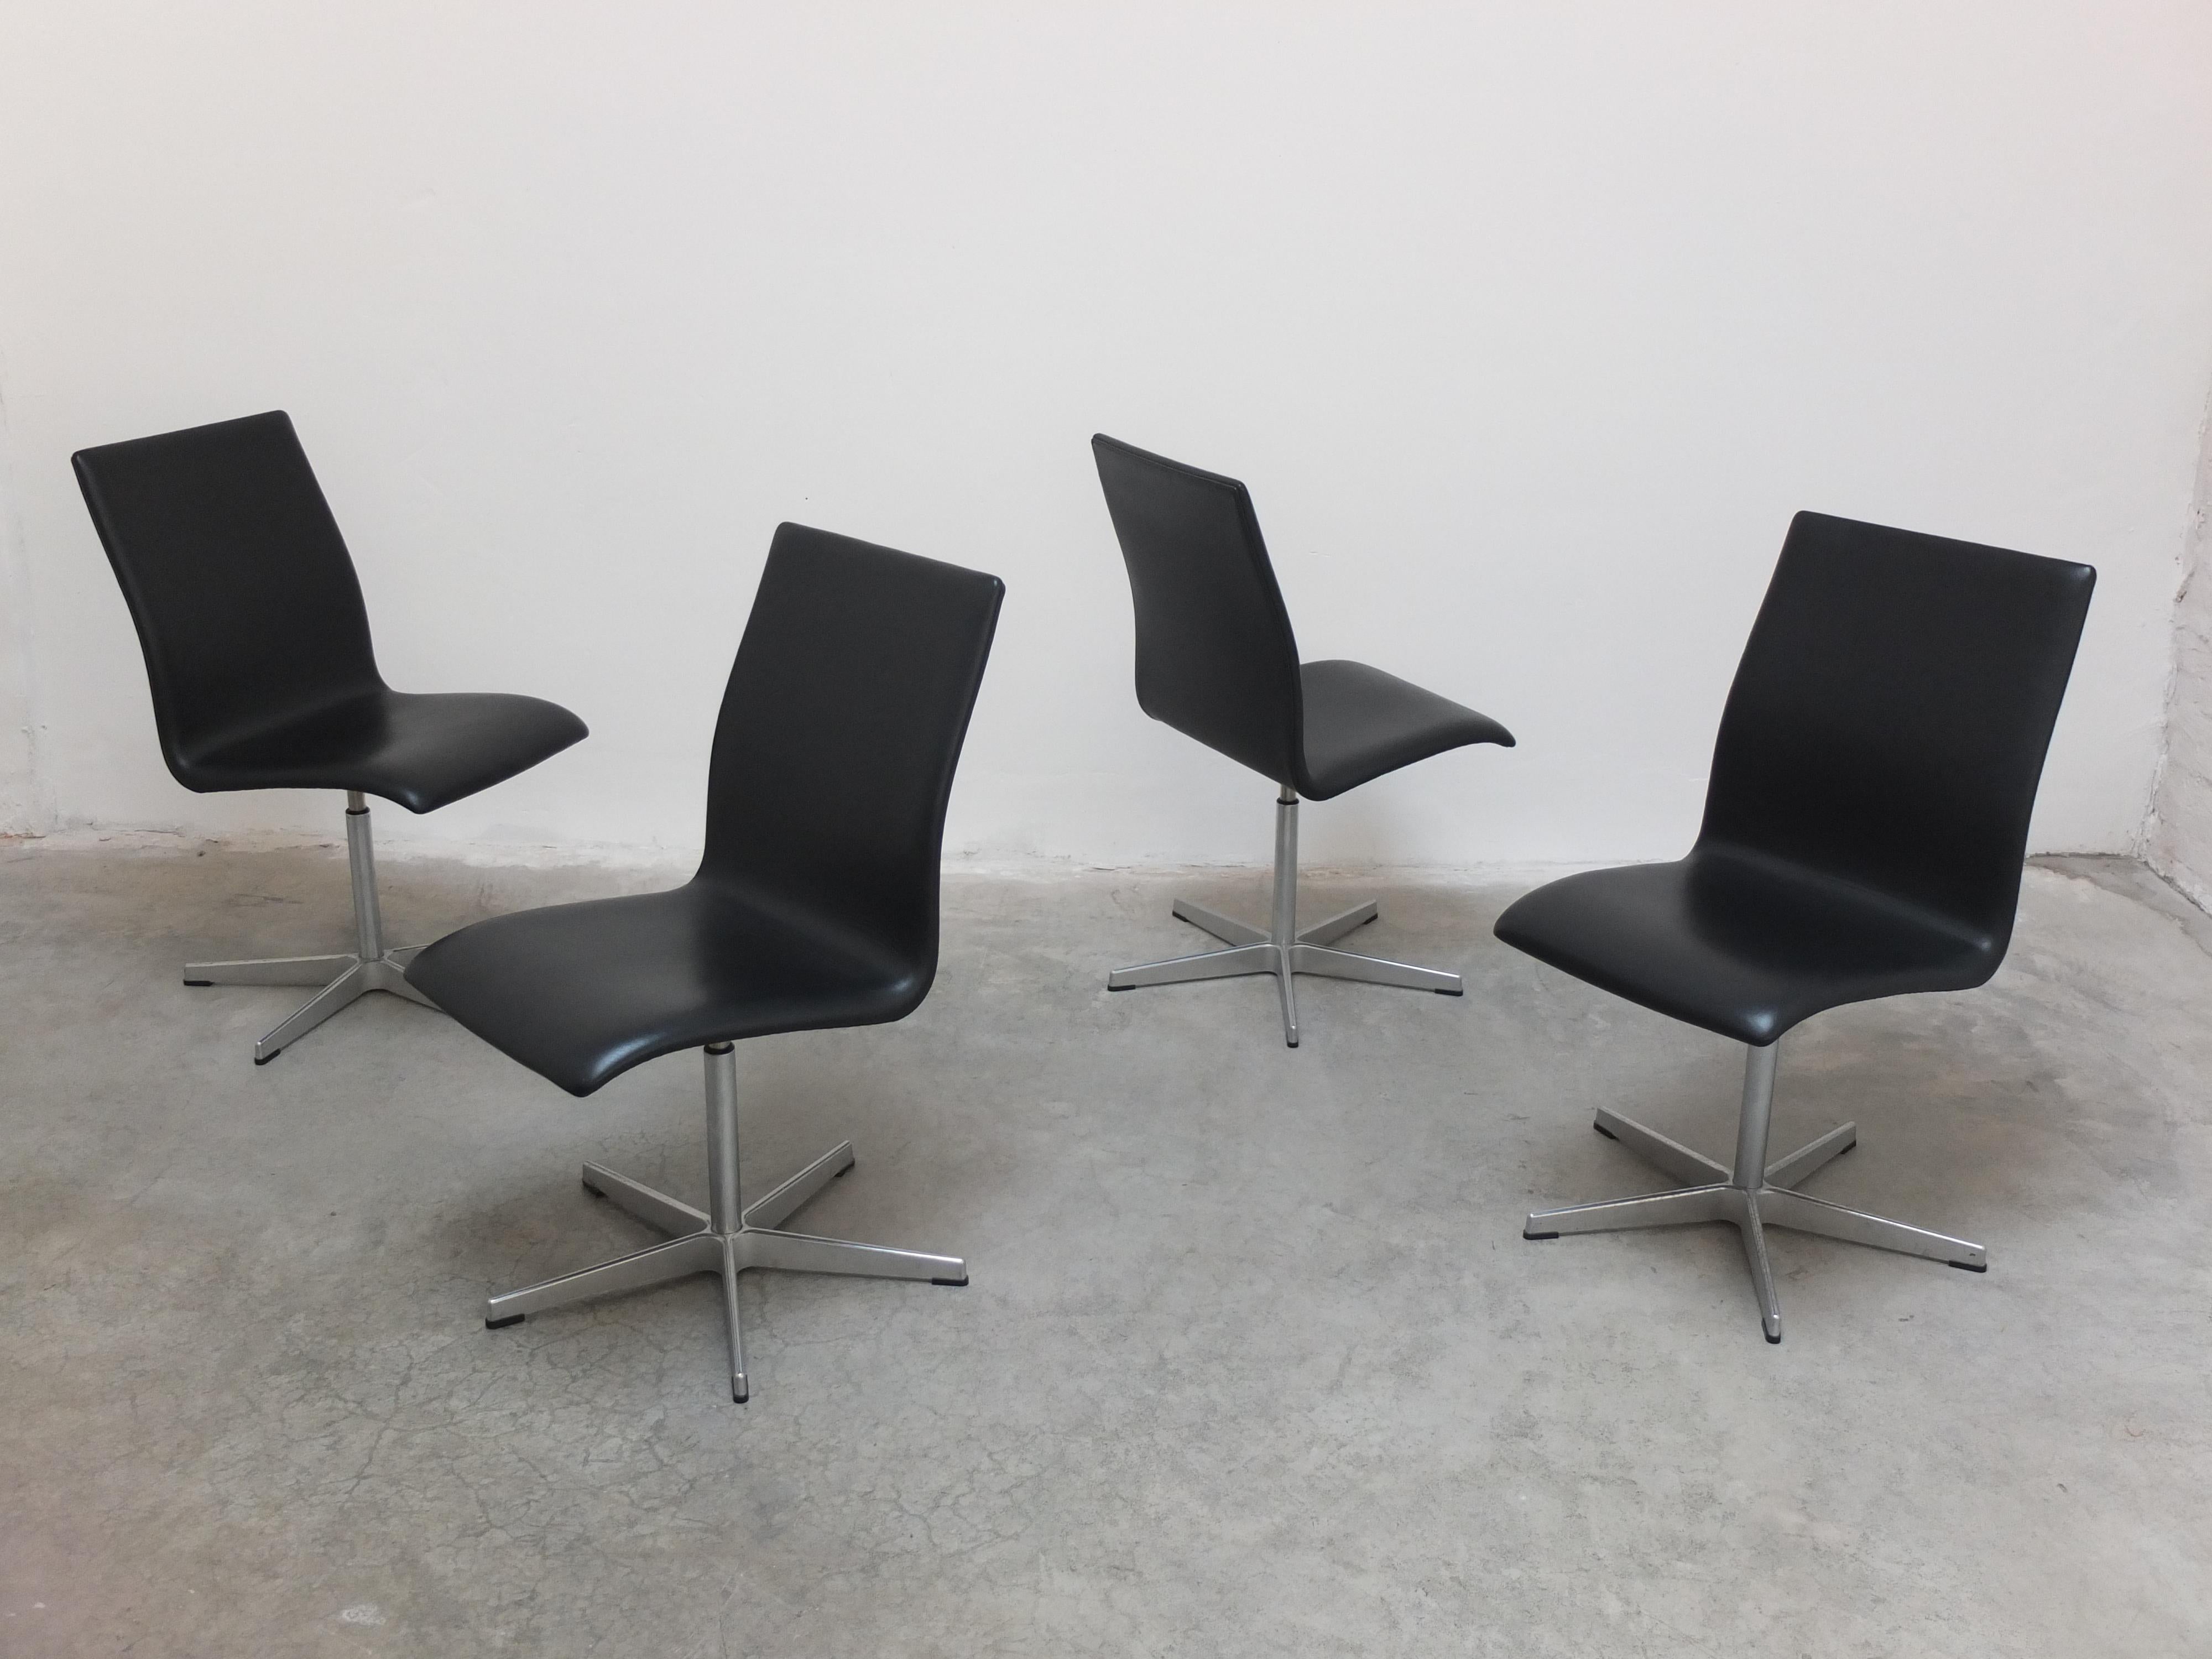 Set of 4 'Oxford' Swivel Chairs by Arne Jacobsen for Fritz Hansen, 1965 For Sale 7